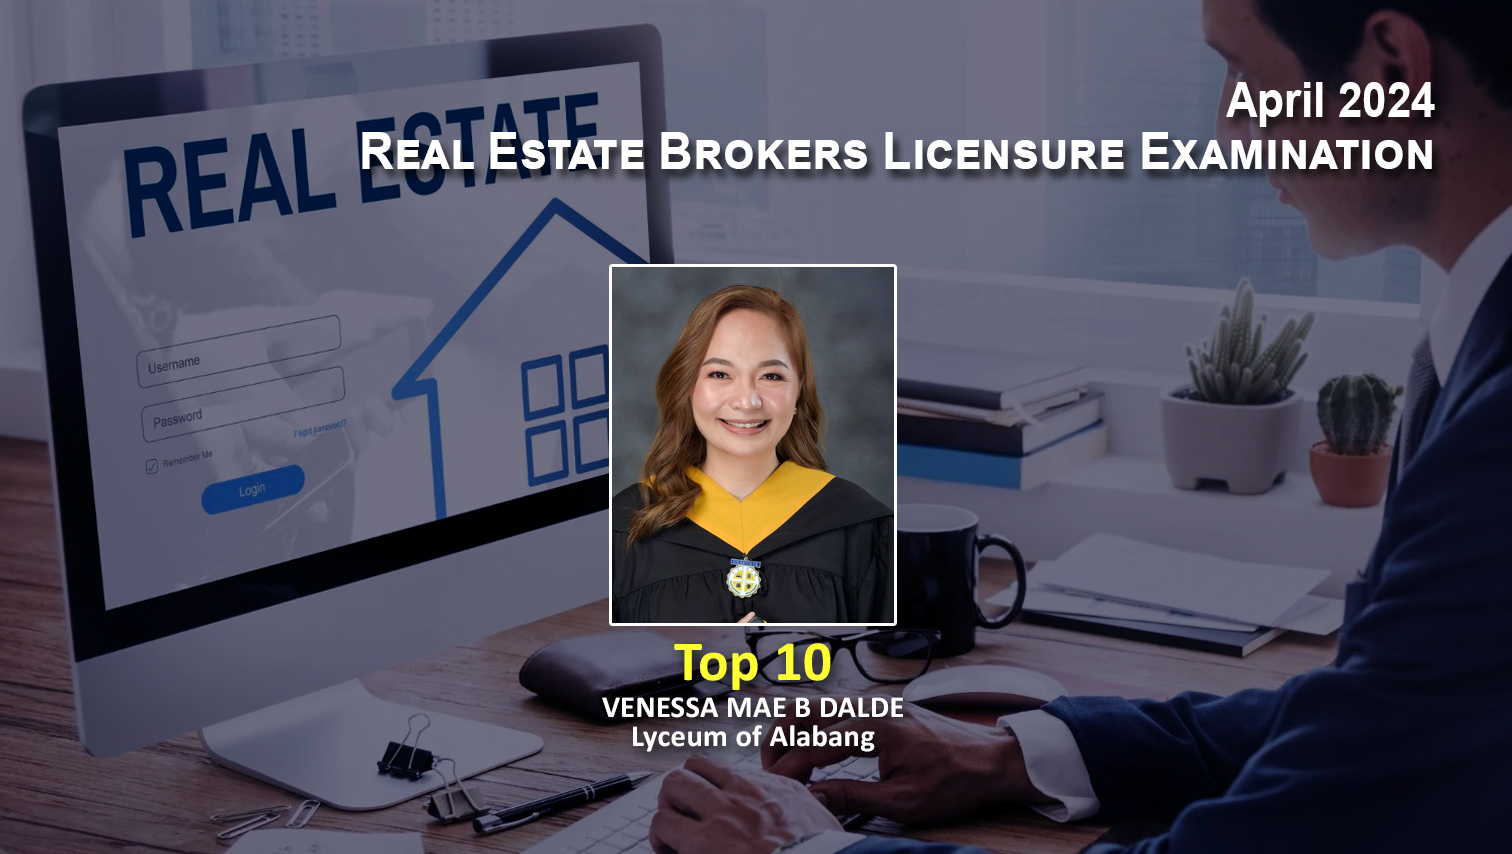 Another topnotcher from Cagayan de Oro in April 2024 Real Estate Brokers Board Exam